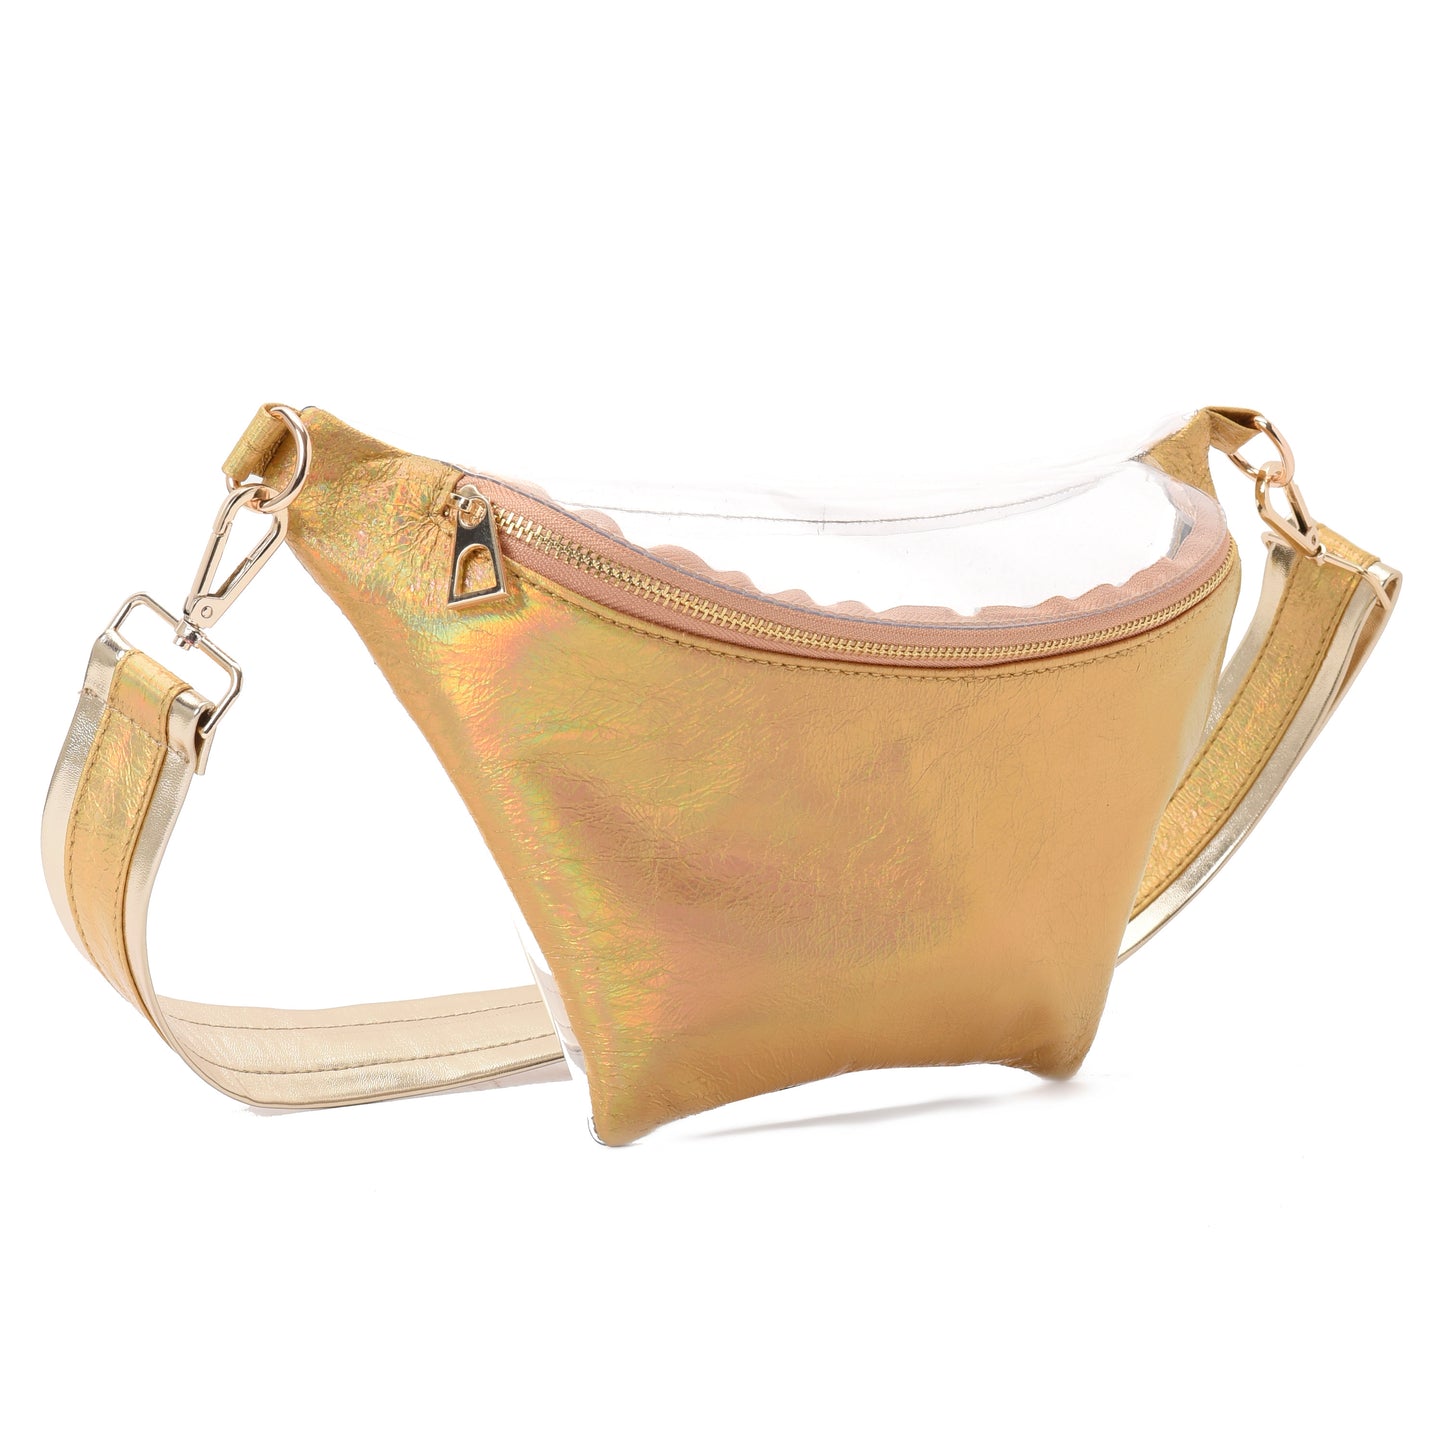 Fanny Beach bag with Metallic Gold Material-3008